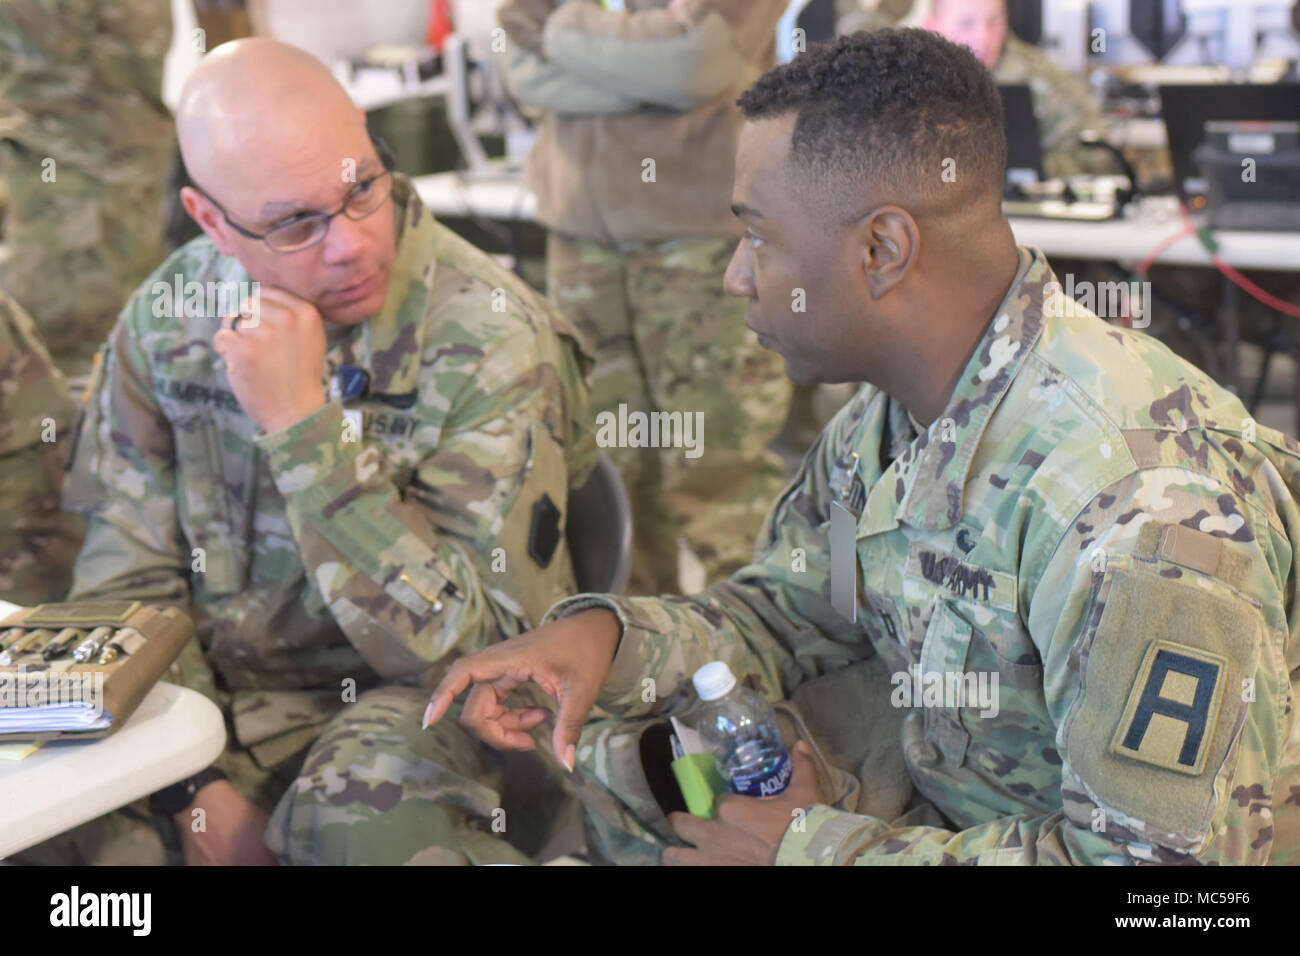 Capt. Zantionyo Goodwin (right), a maintenance observer coach/trainer with First Army’s 174th Infantry Brigade, talks with Lt. Col. Ron Humphrey, chief of Logistics for the Pennsylvania Army National Guard's 28th Infantry Division, during the 28th ID’s culminating training exercise at Fort Hood, Texas, Jan. 30, 2018. The 28th ID is preparing to deploy to the Middle East, where the unit will support Operation Spartan Shield. 'First Army has been very helpful, both in training and in the real world, assisting us with things like (requests for information). Overall, I think they’ve done well with Stock Photo